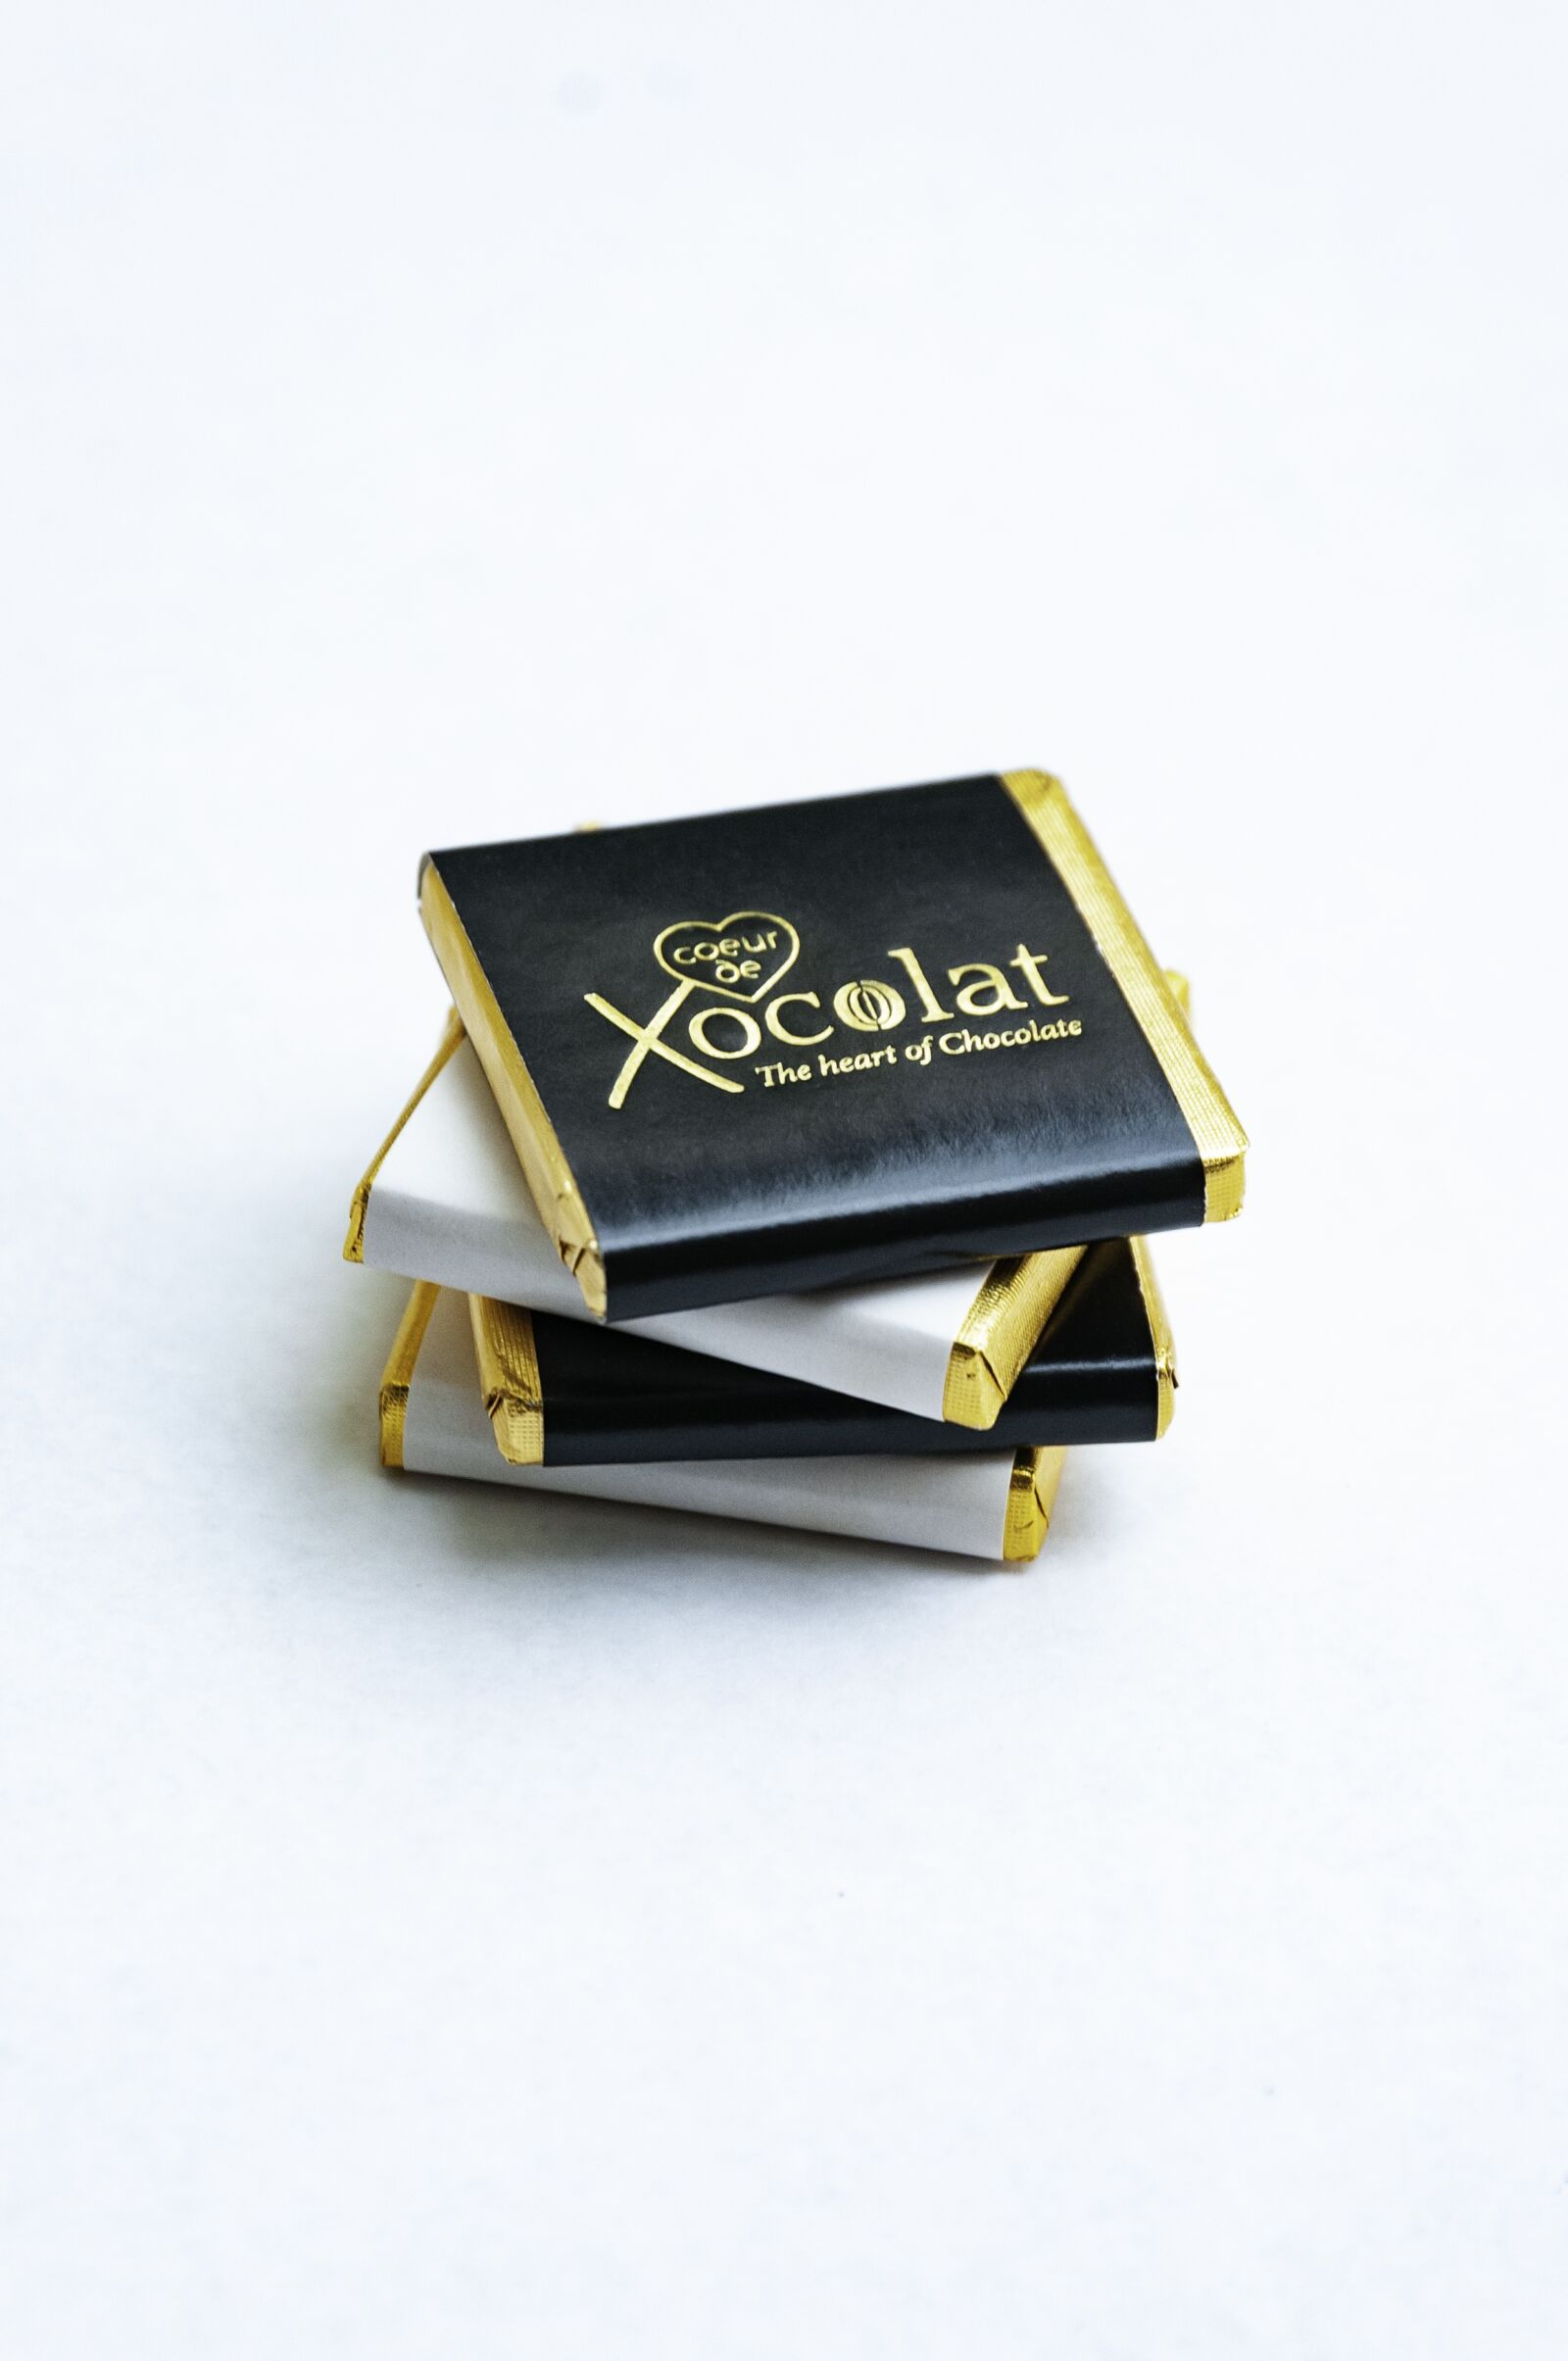 Nikon D300S sample photo. Chocolate, neopolitains, square photography